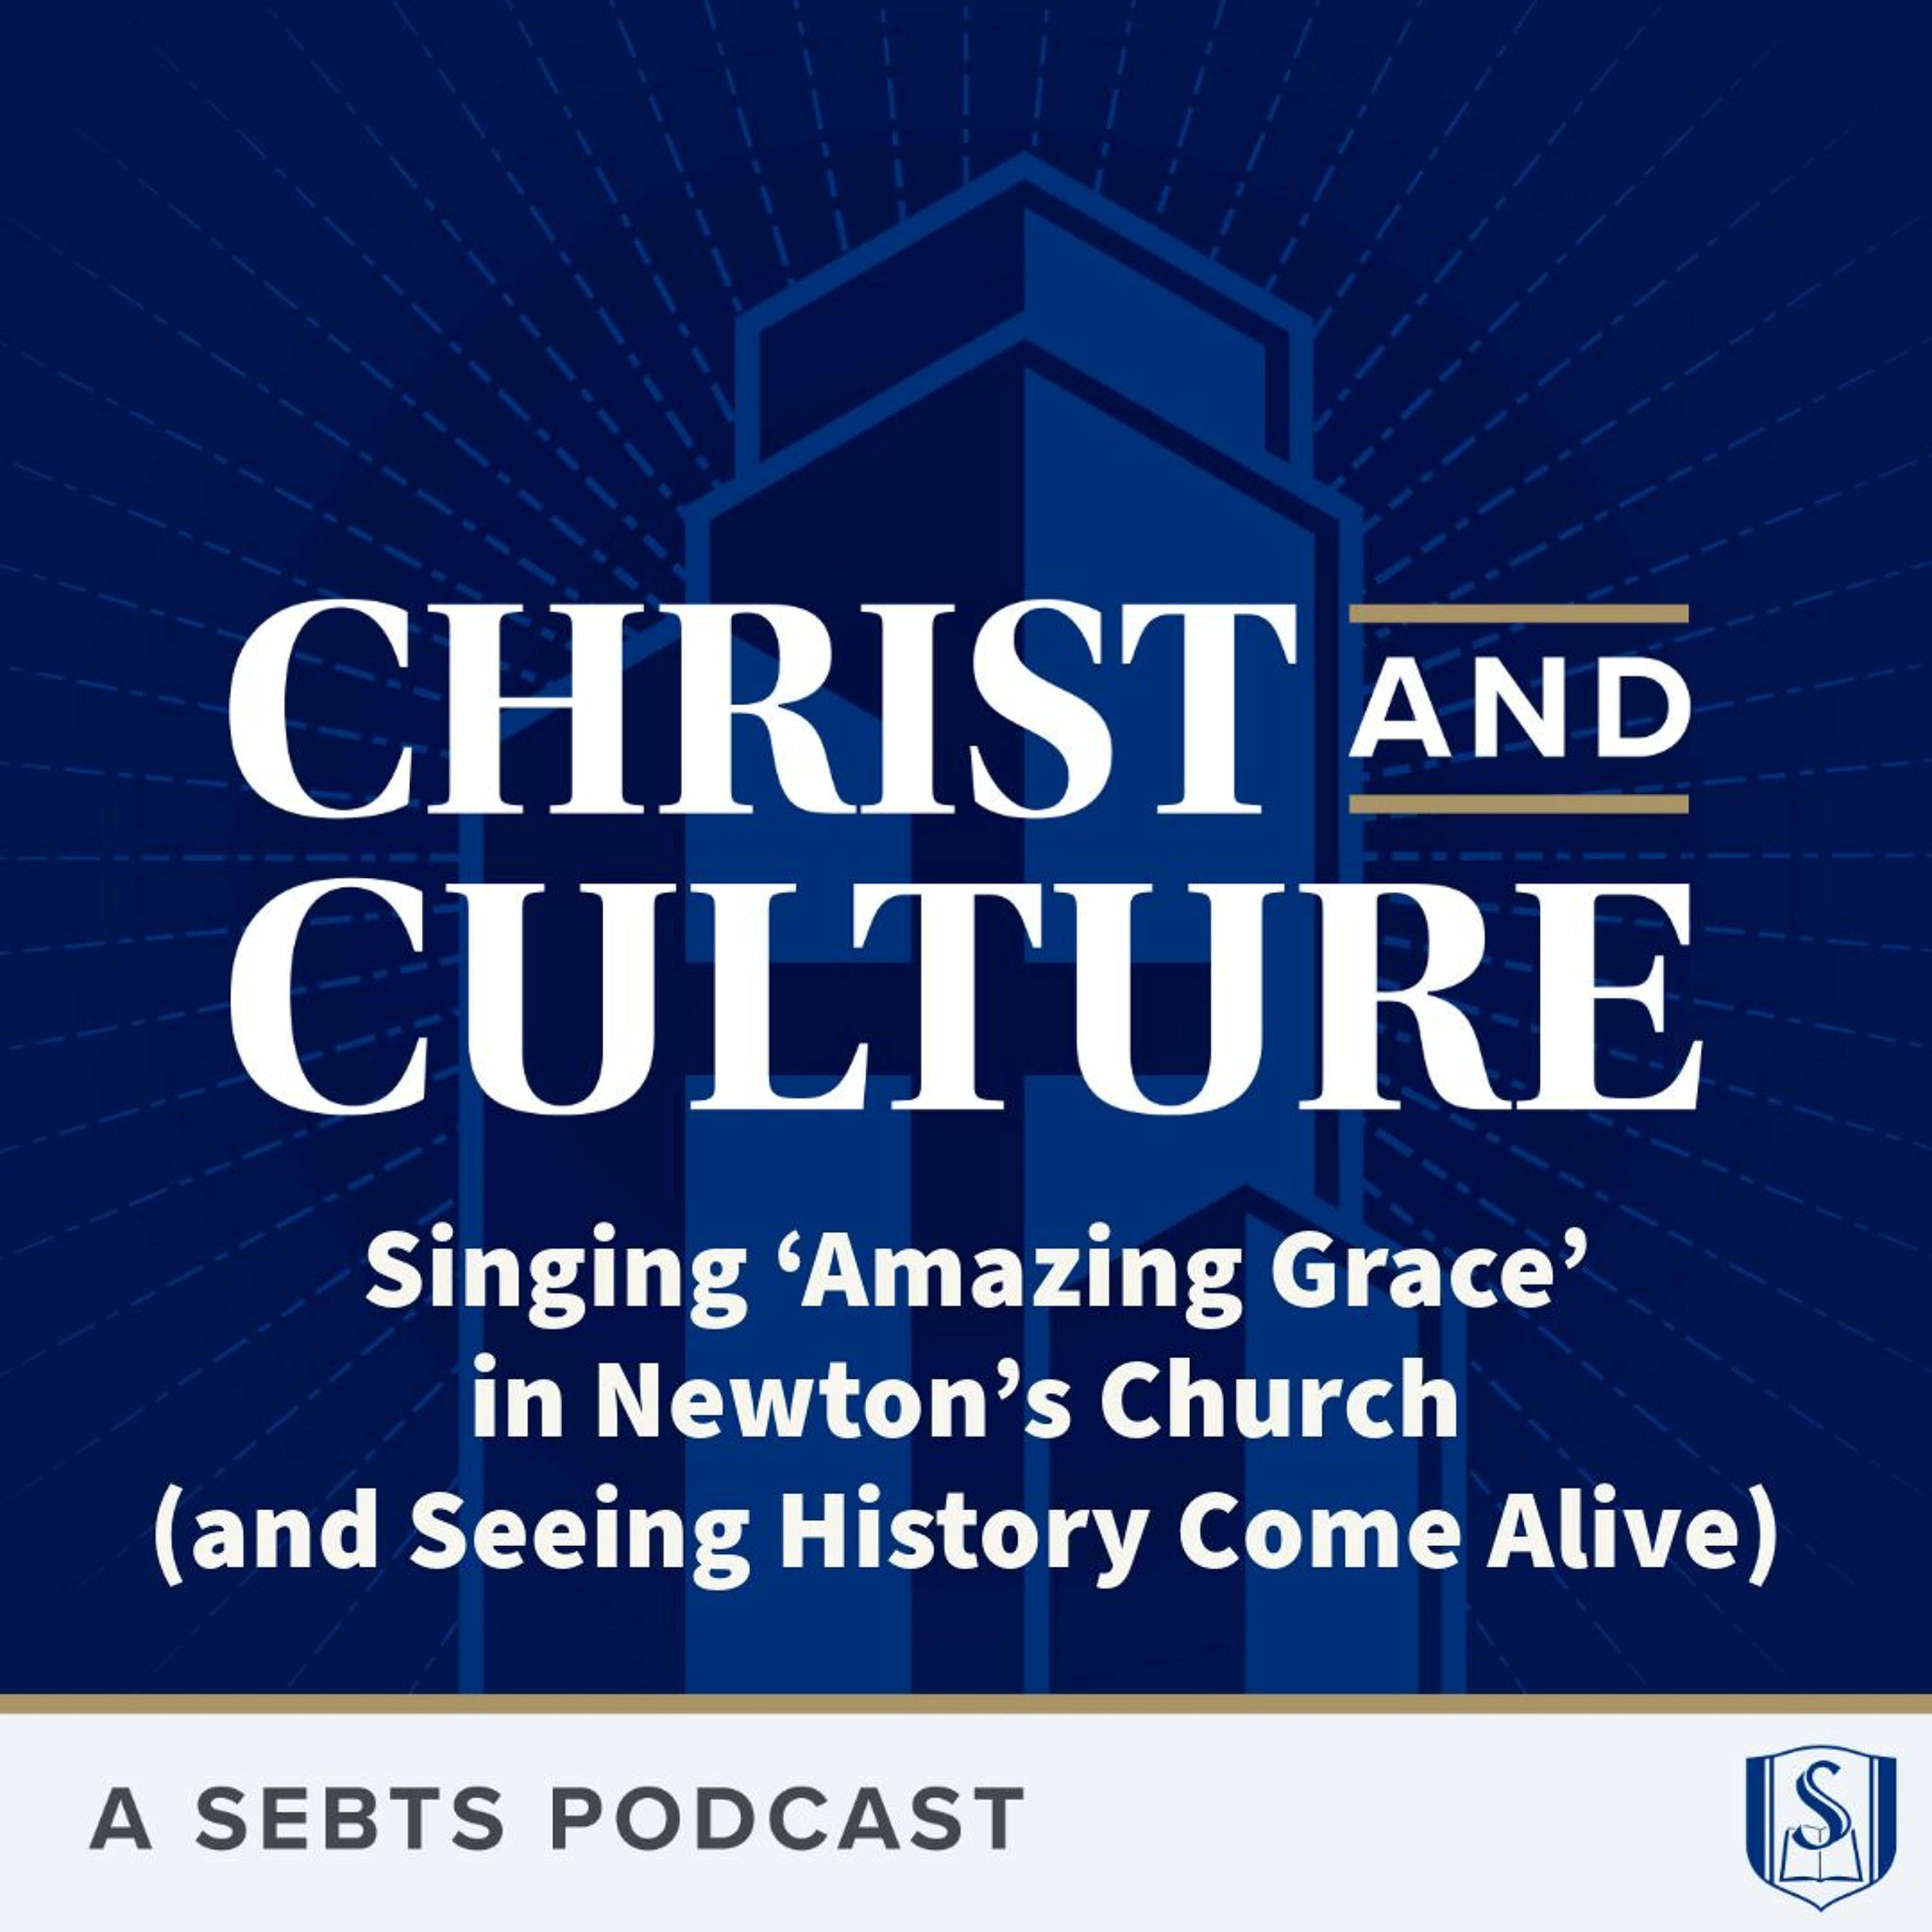 Stephen Eccher: Singing ‘Amazing Grace’ in Newton’s Church (and Seeing History Come Alive) - EP 136